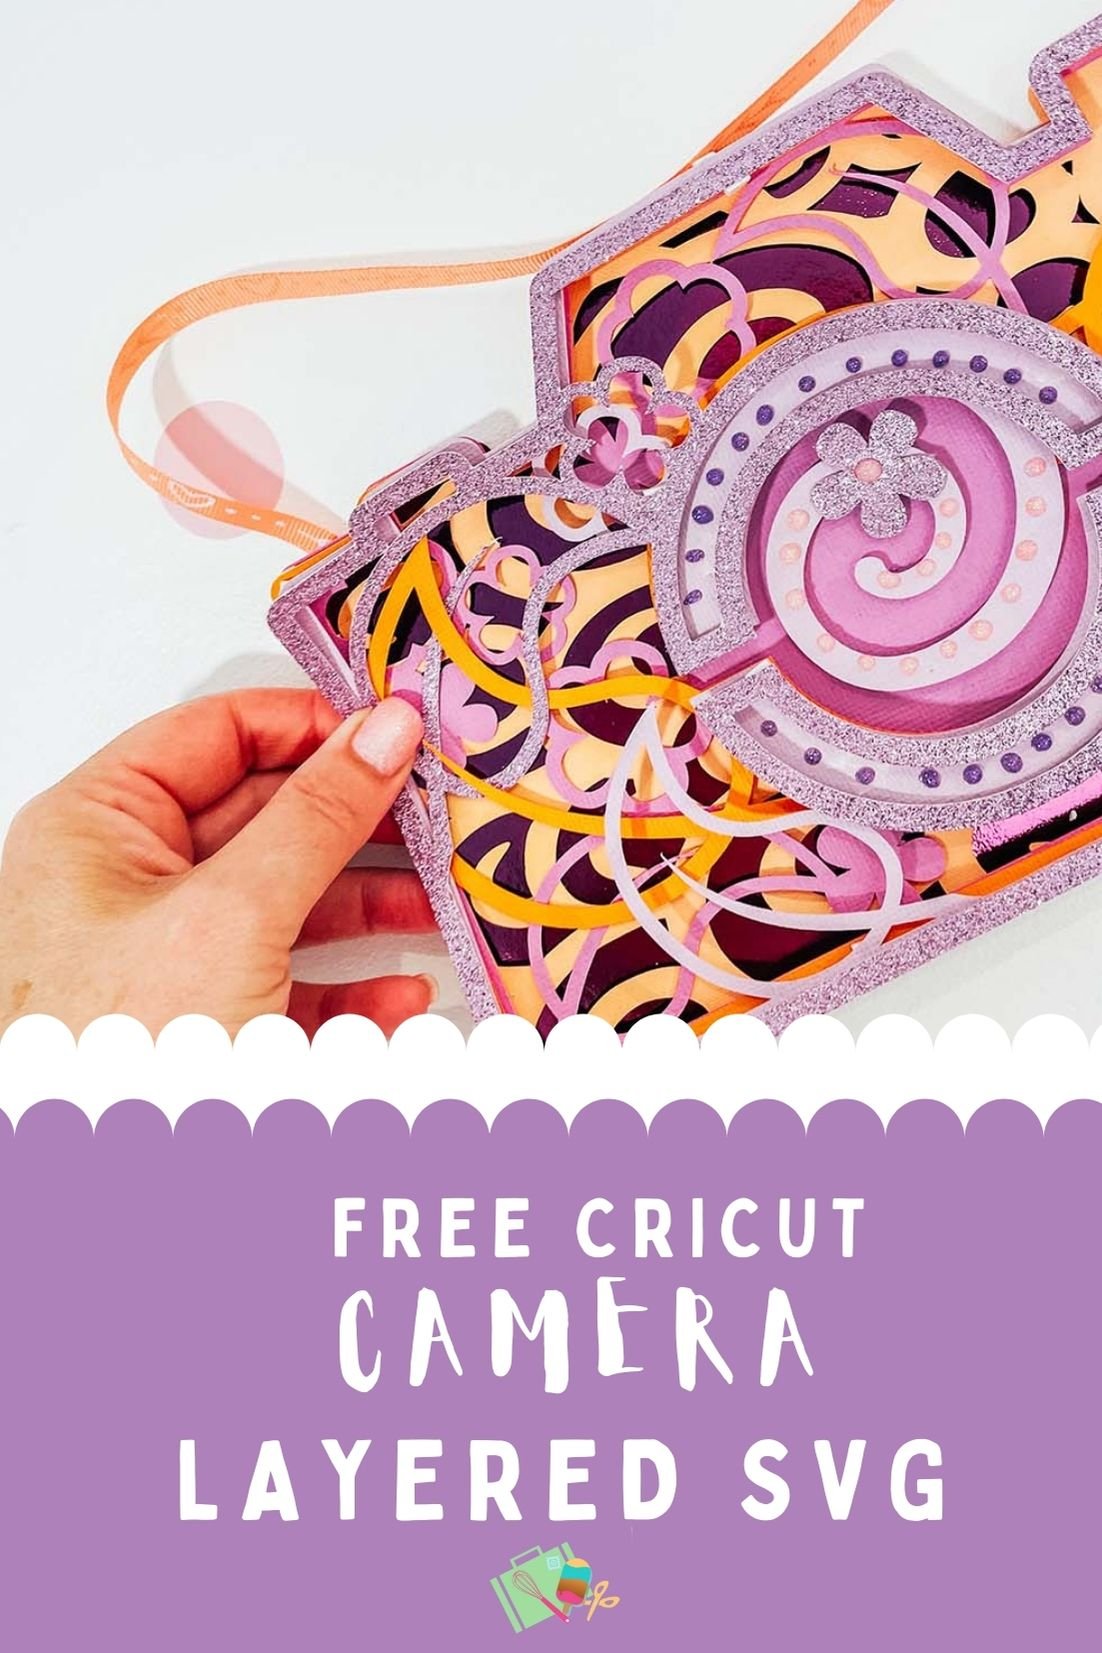 Free Cricut  SVG Camera layered file for card making and scrapbooking 